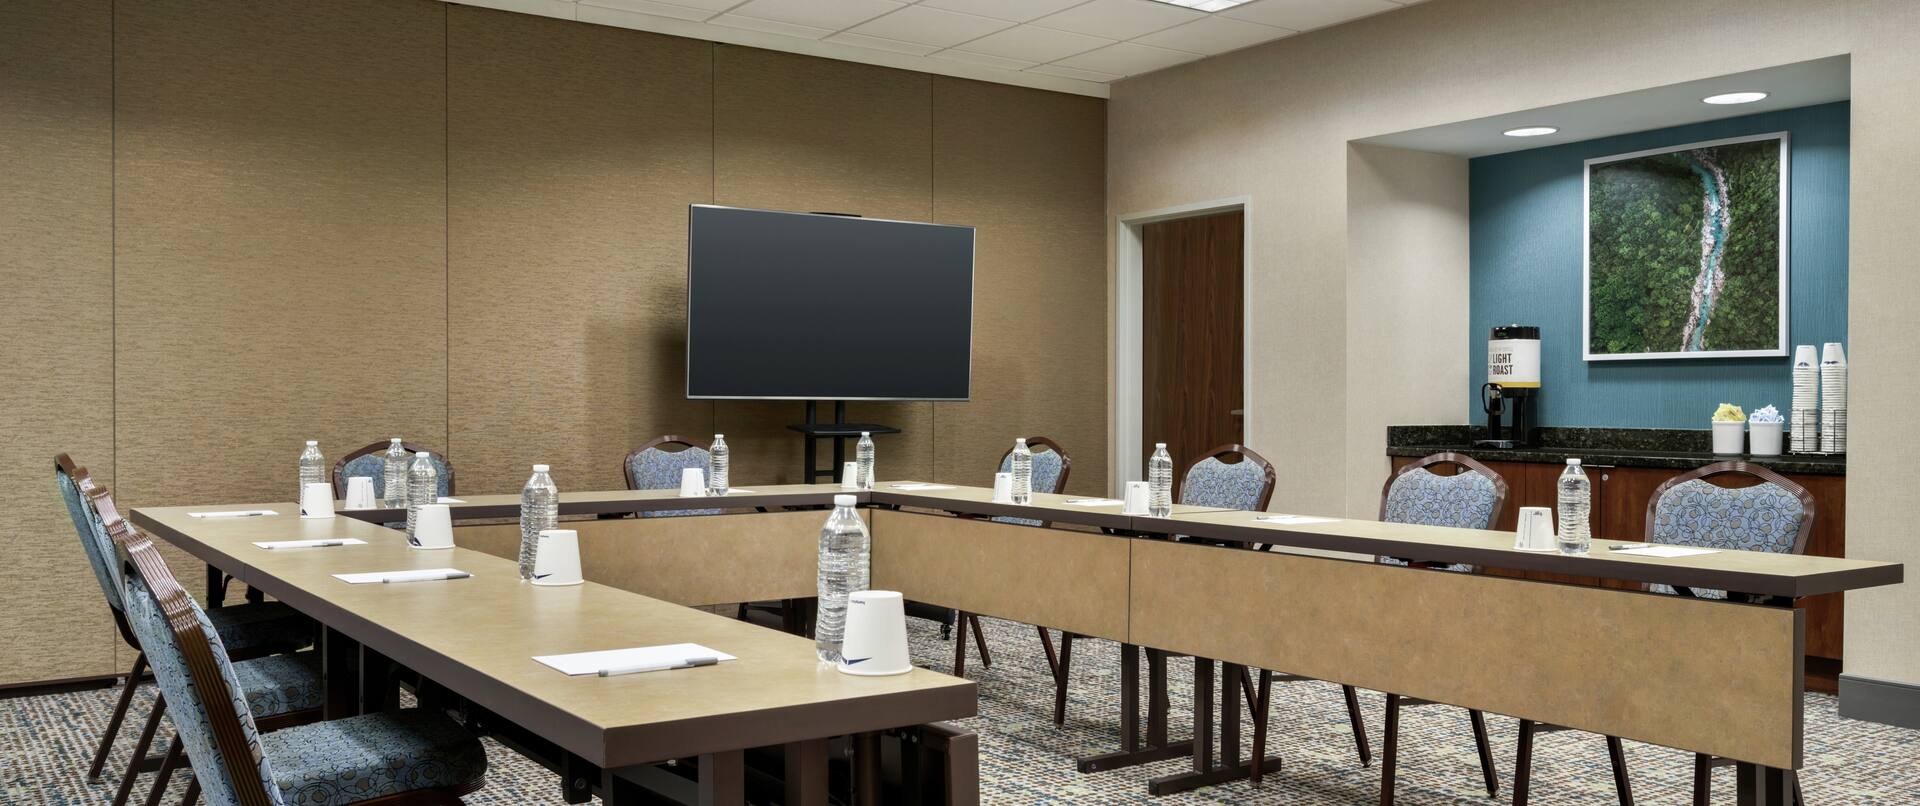 Convenient on-site meeting space featuring u-shape setup, TV at front of room, and coffee break station.